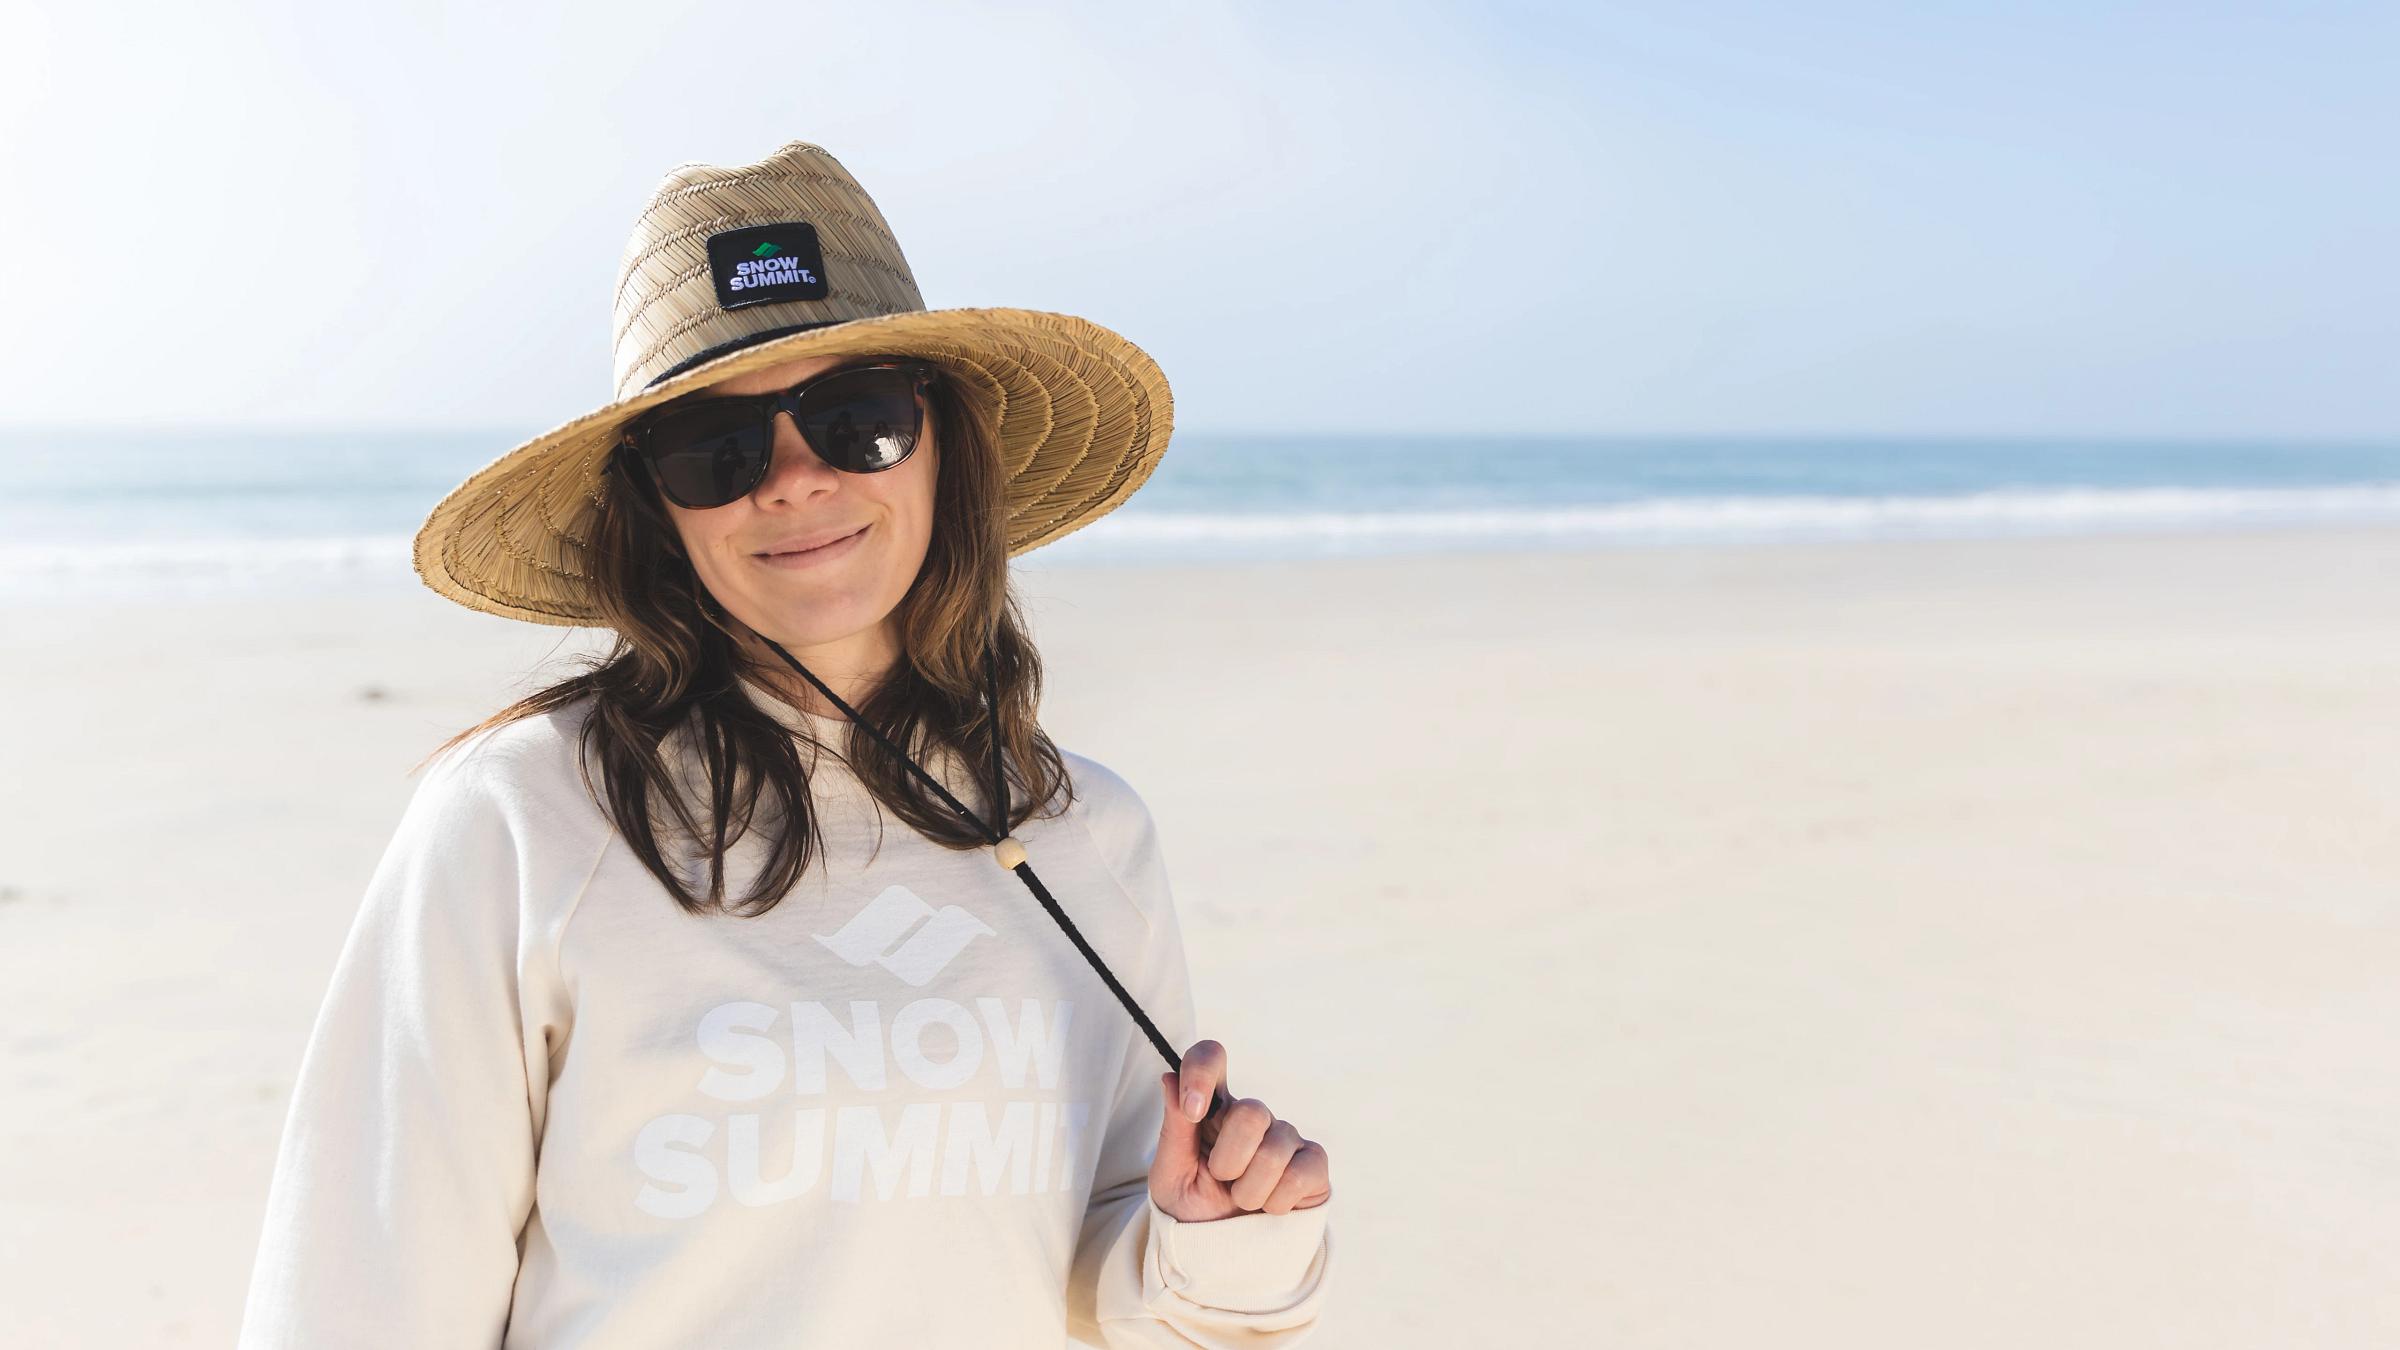 Female wearing sunglasses and a snow summit hat at the beach